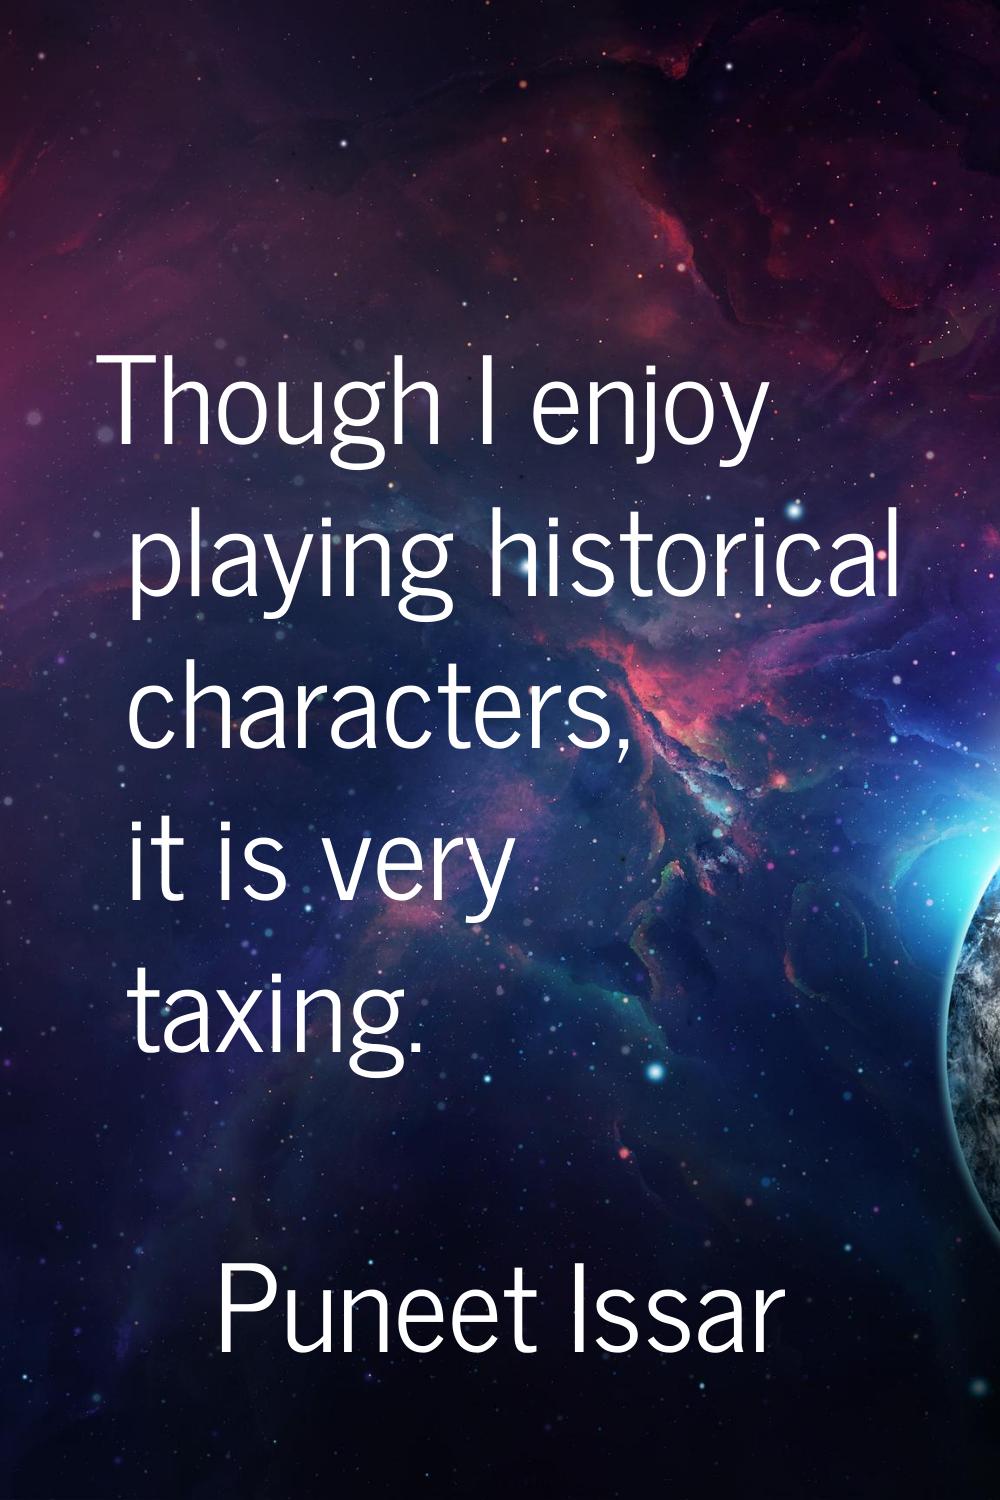 Though I enjoy playing historical characters, it is very taxing.